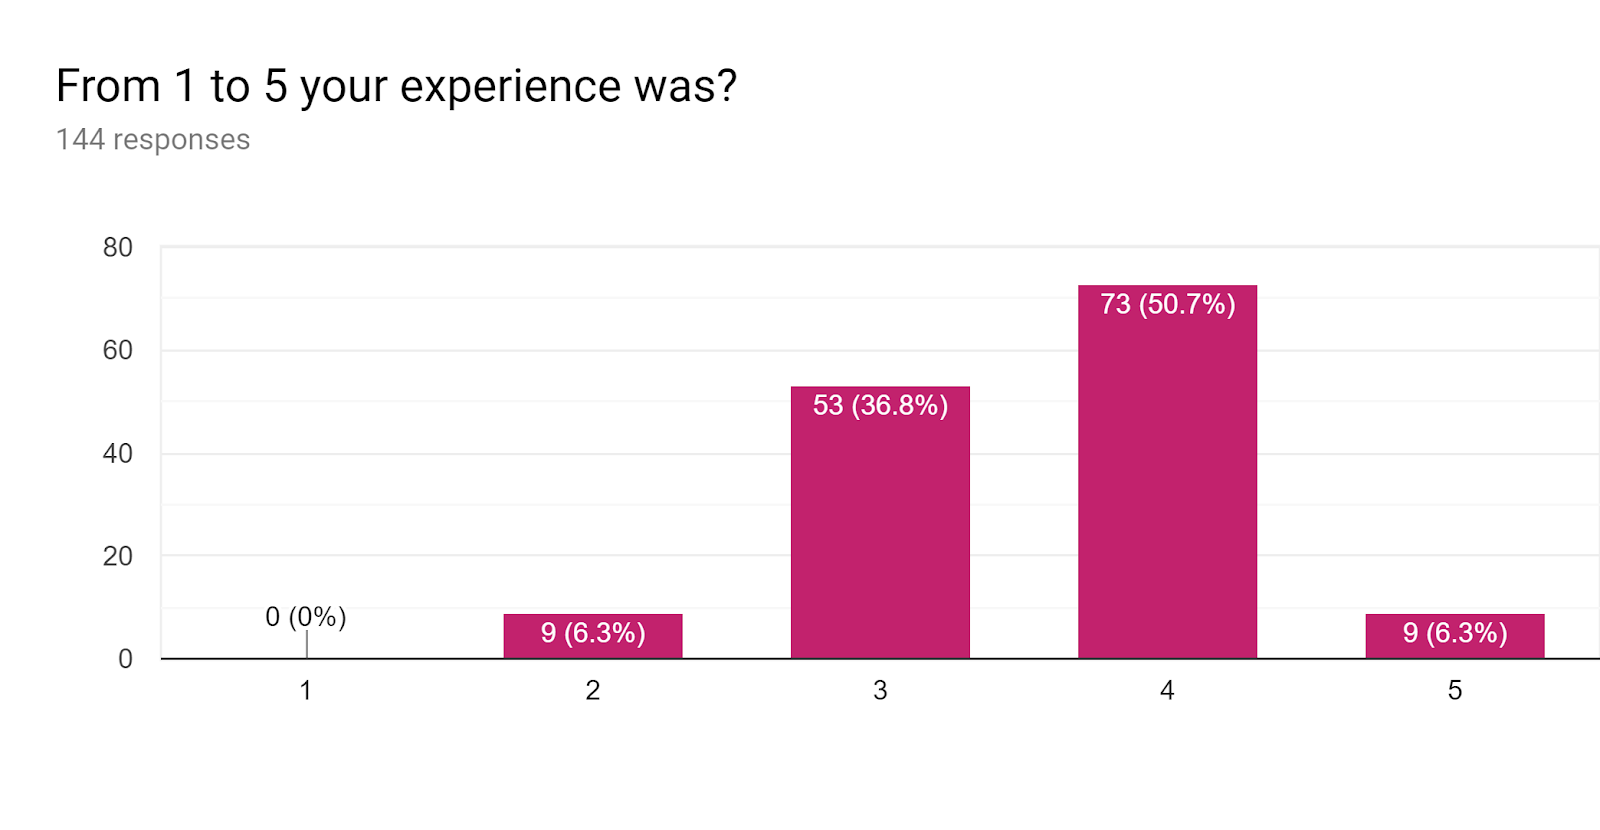 Forms response chart. Question title: From 1 to 5 your experience was?. Number of responses: 144 responses.